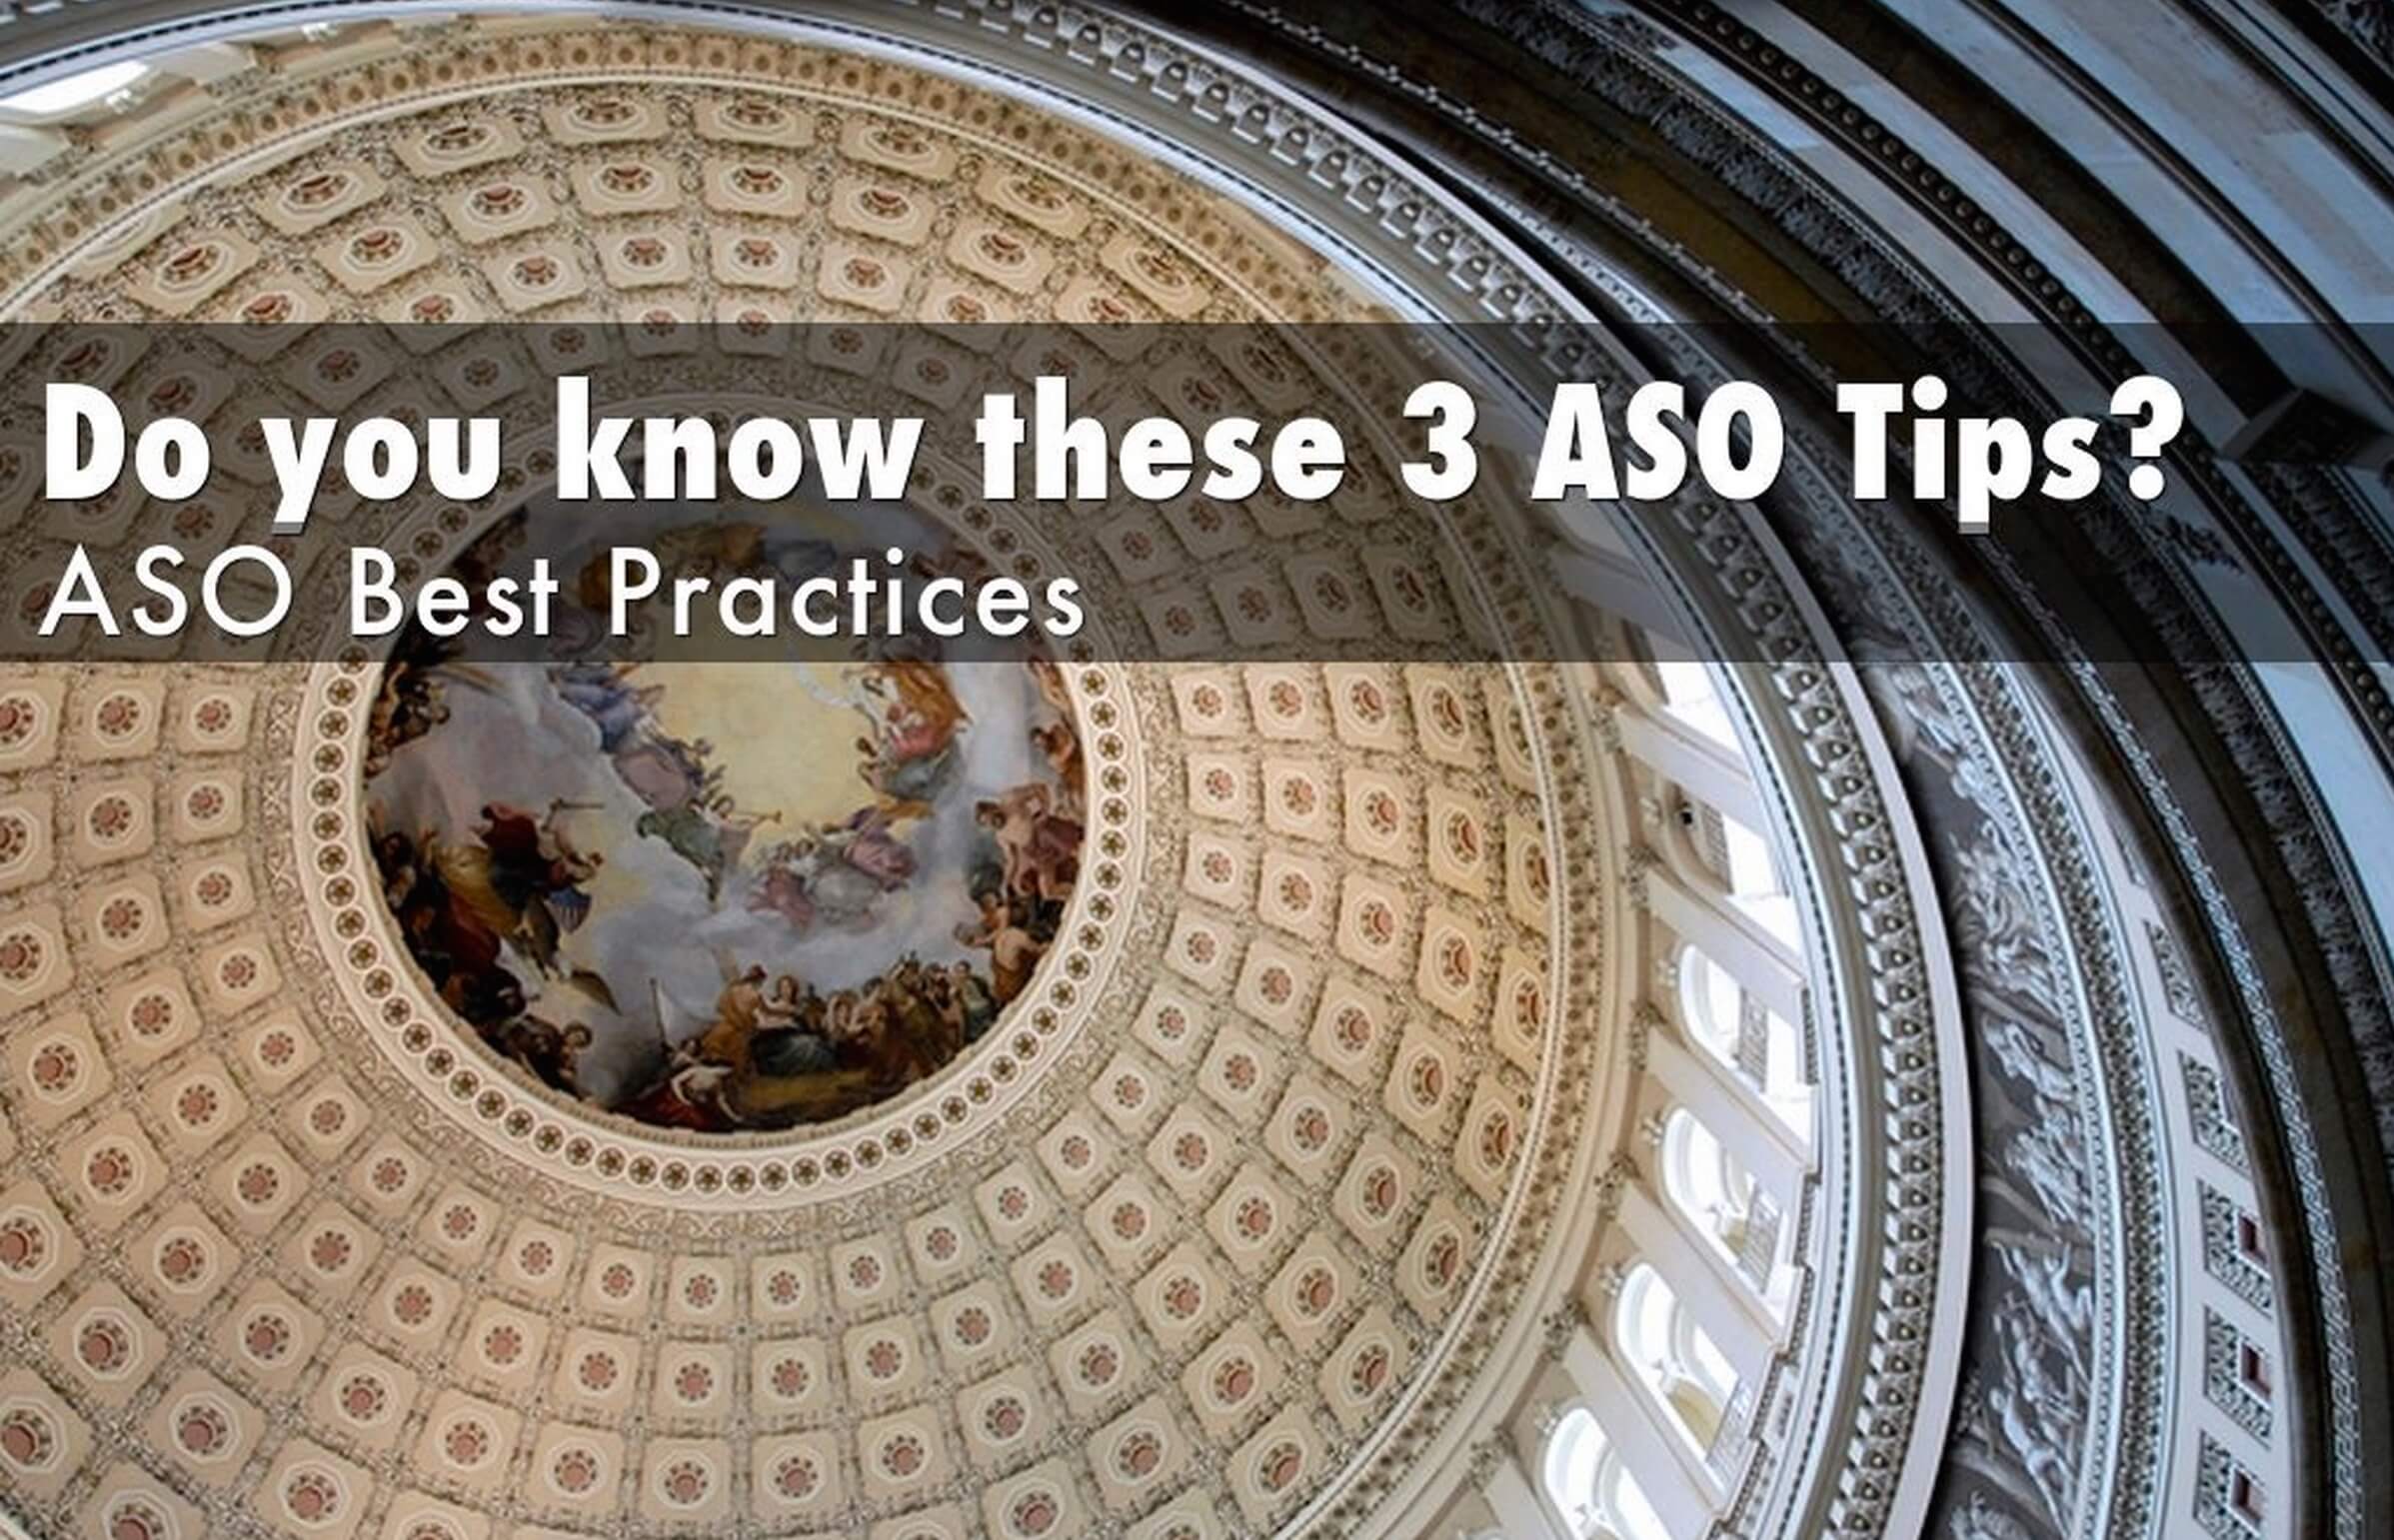 Do you know these 3 ASO Strategies? - Slides